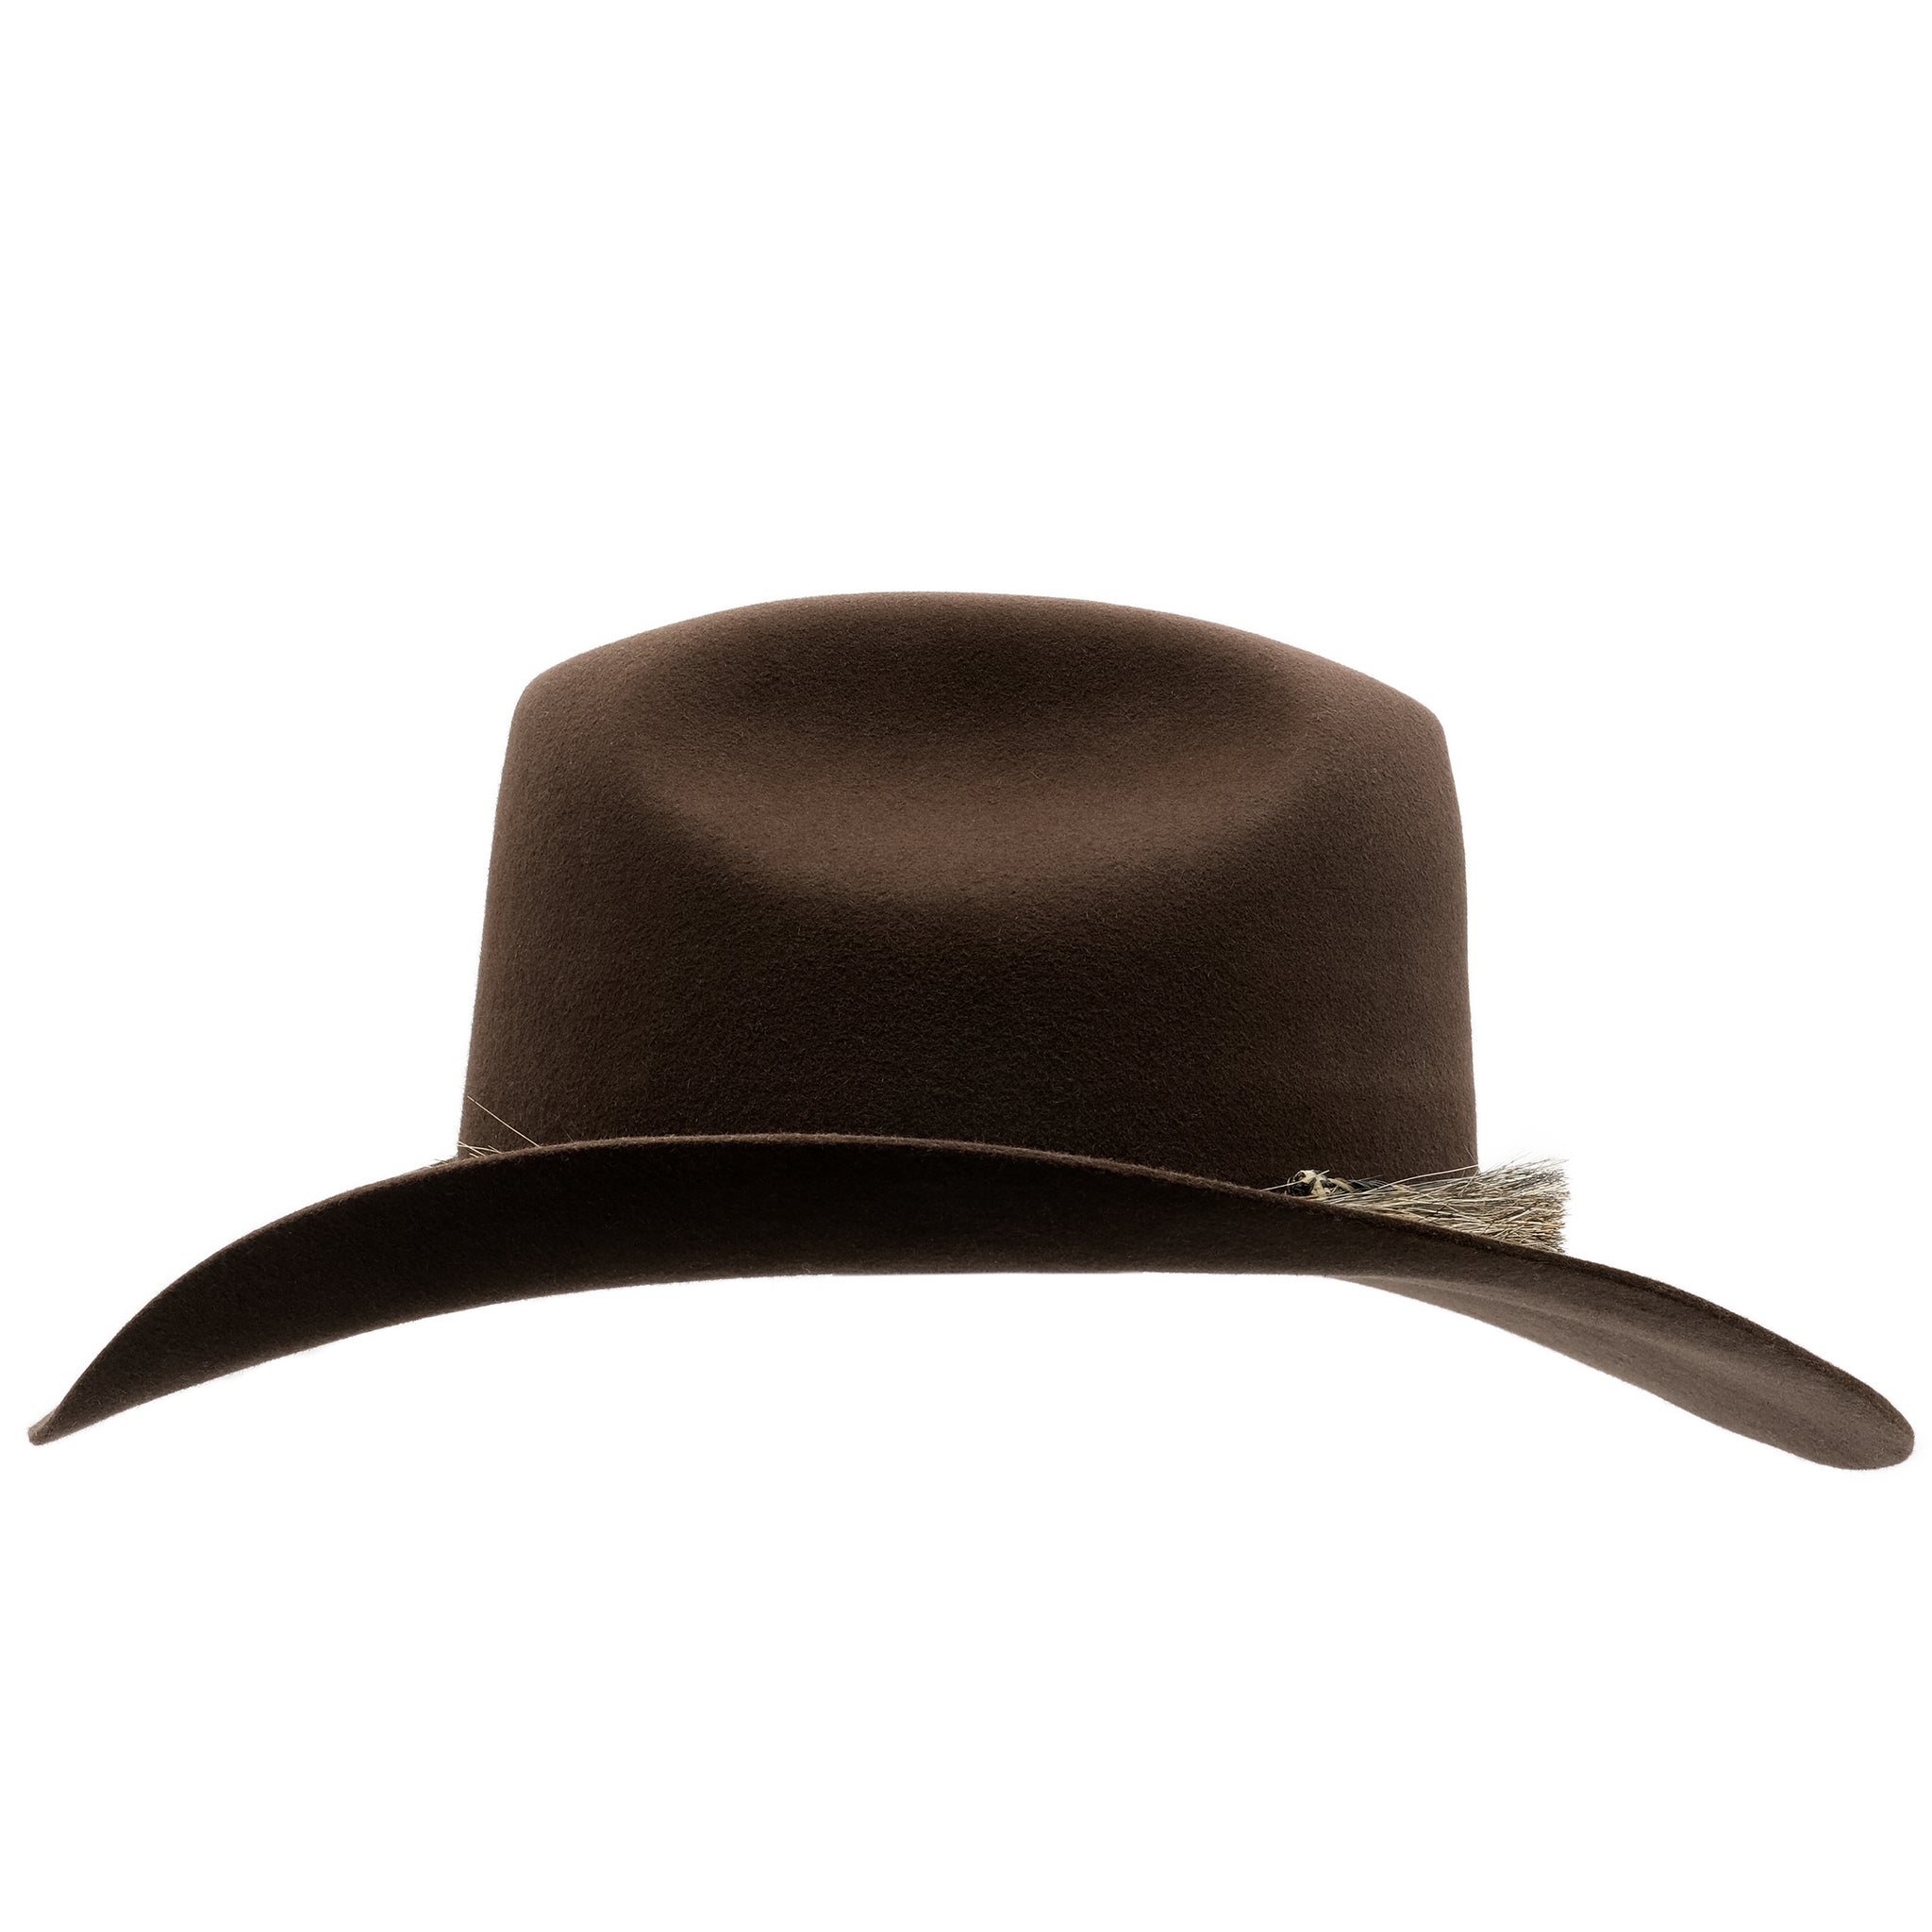 Side view of Akubra Rough Rider in Loden colour